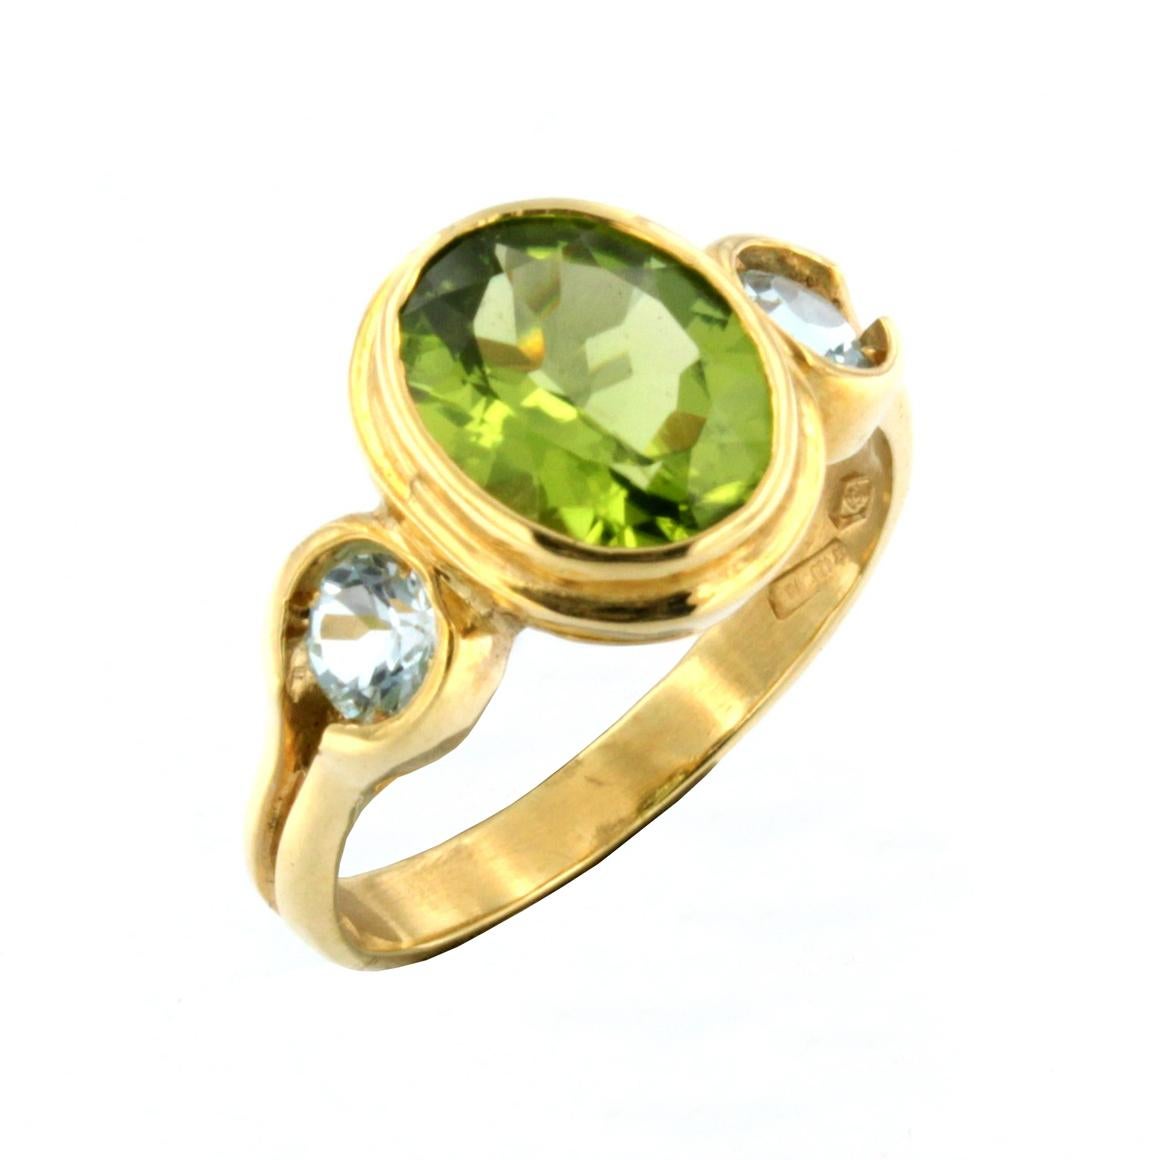 Modern 18k Yellow Gold with Peridot and Blue Topaz Ring